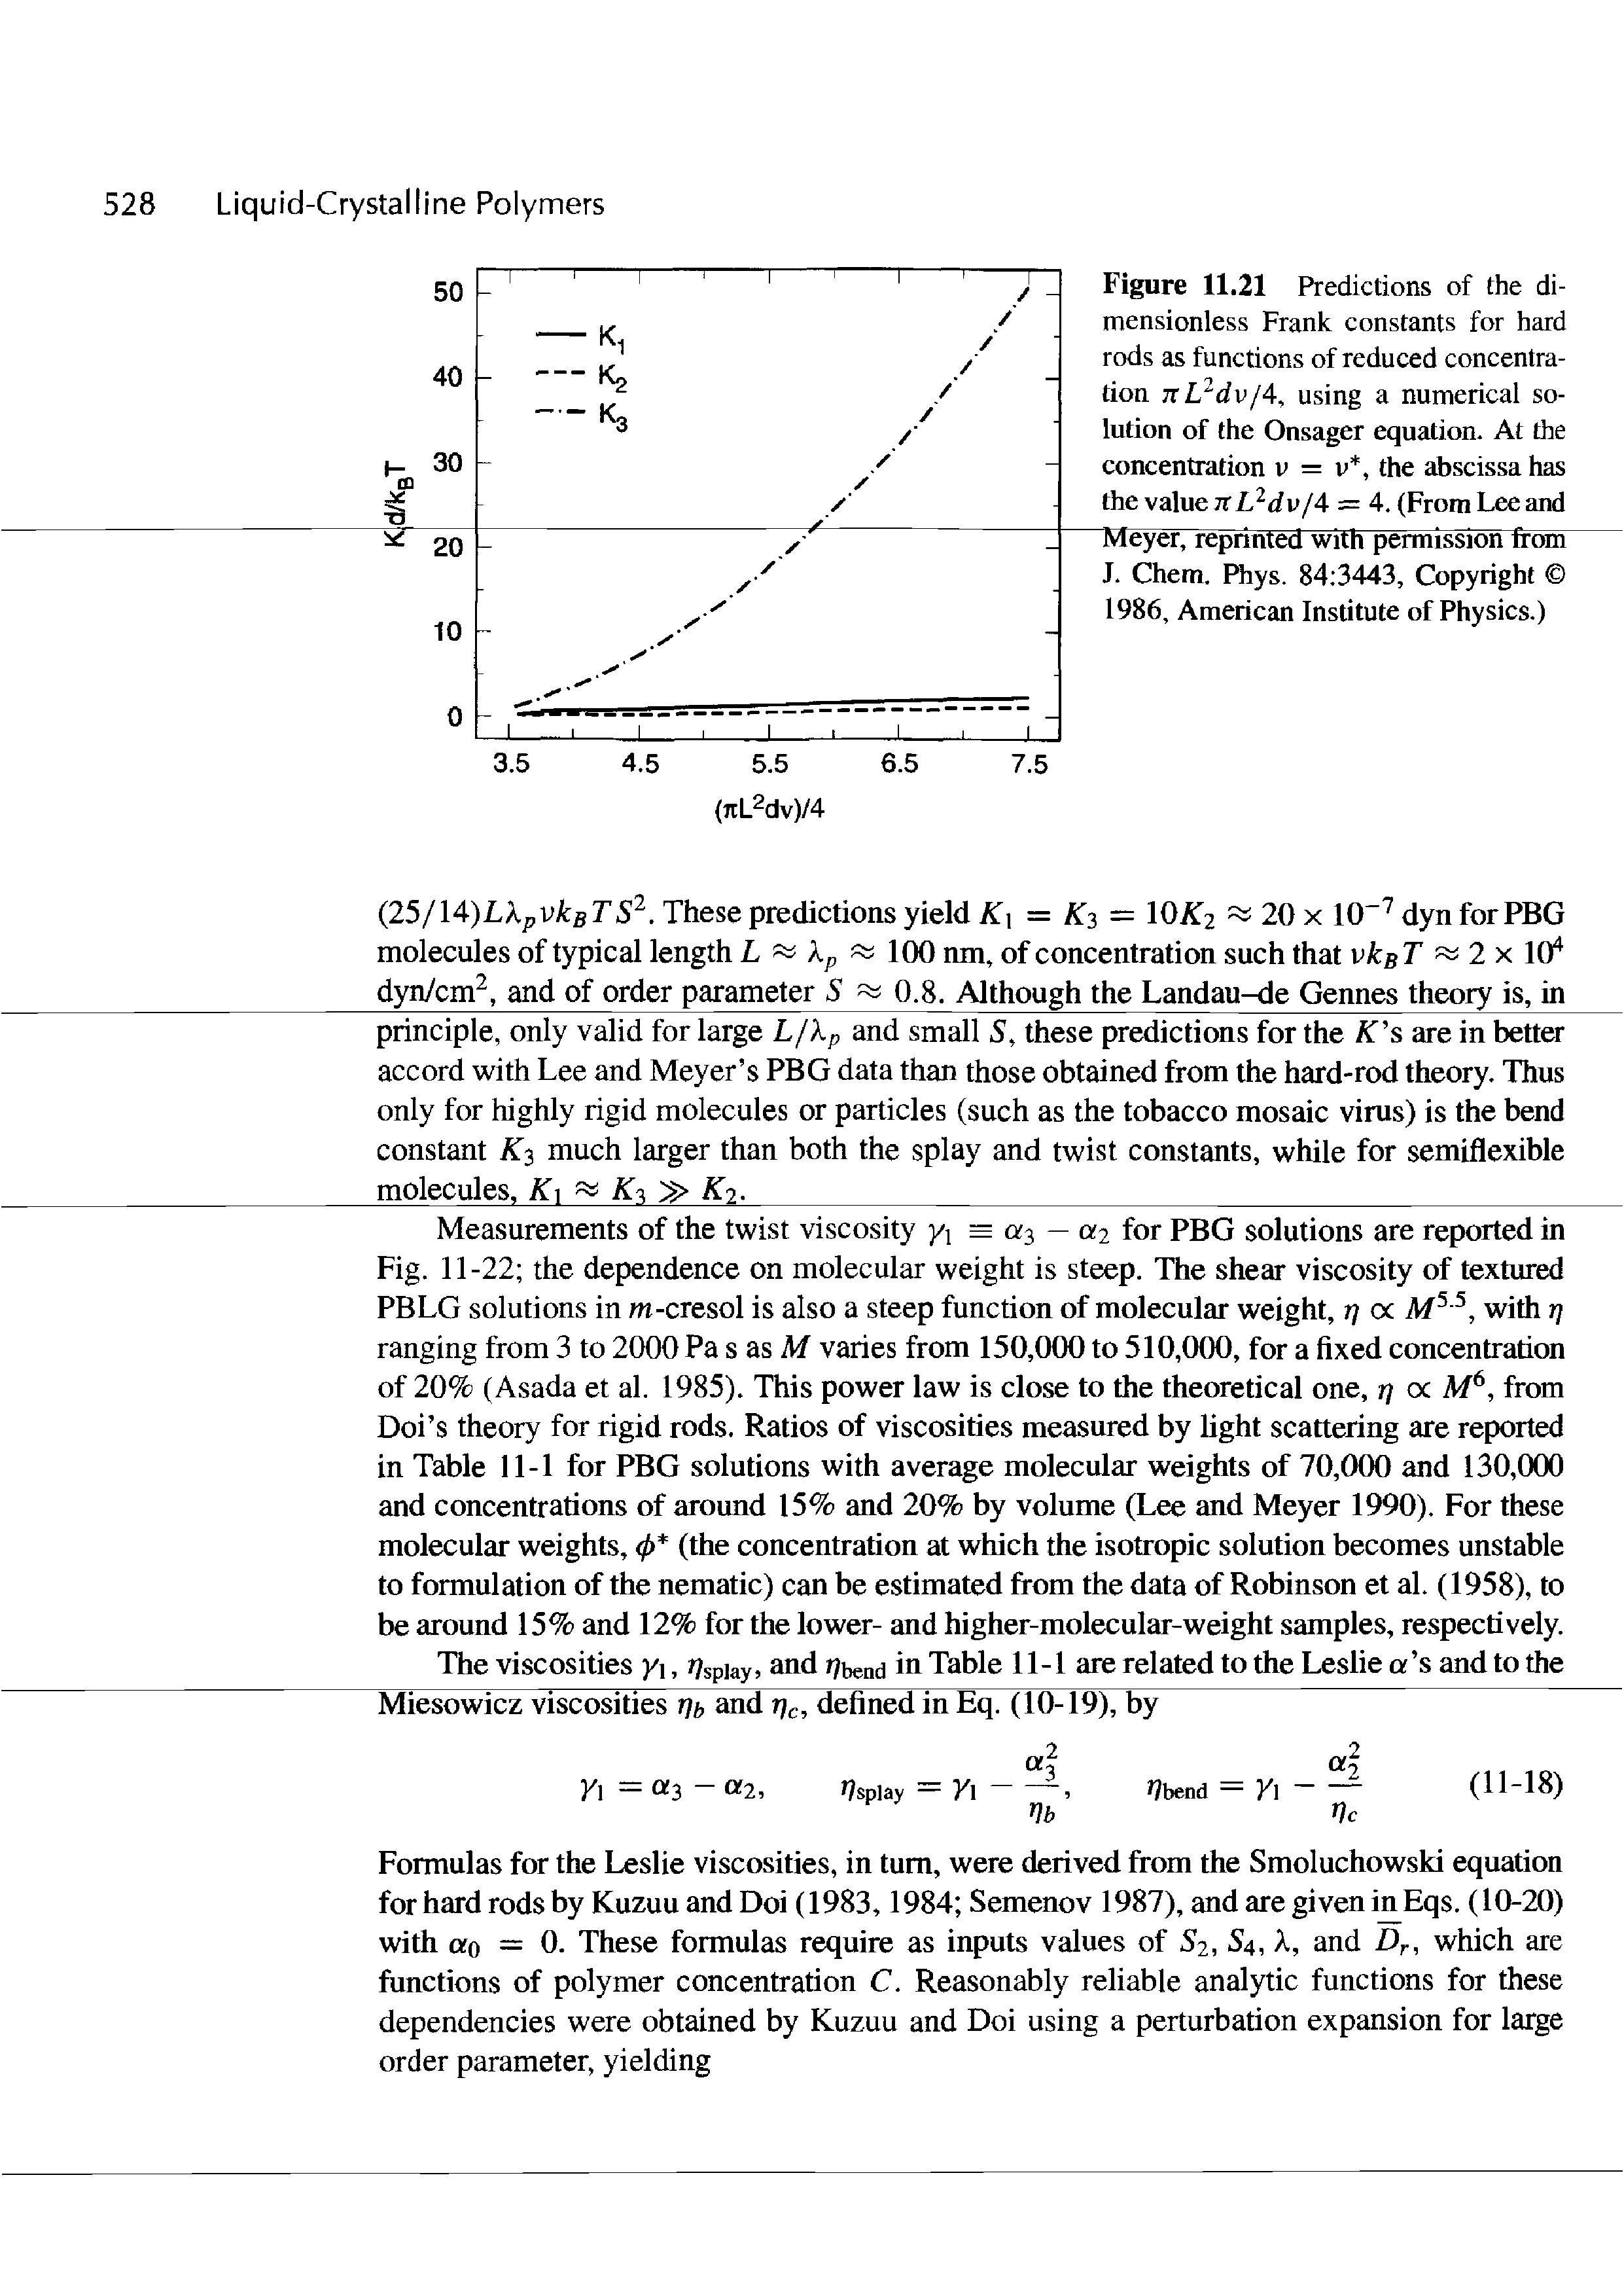 Figure 11.21 Predictions of the dimensionless Frank constants for hard rods as functions of reduced concentration nL"dv/A, using a numerical solution of the Onsager equation. At the concentration v = v, the abscissa has the value n L Ju/4 = 4. (From Lee and Meyer, reprinted with permission from J. Chem. Phys. 84 3443, Copyright 1986, American Institute of Physics.)...